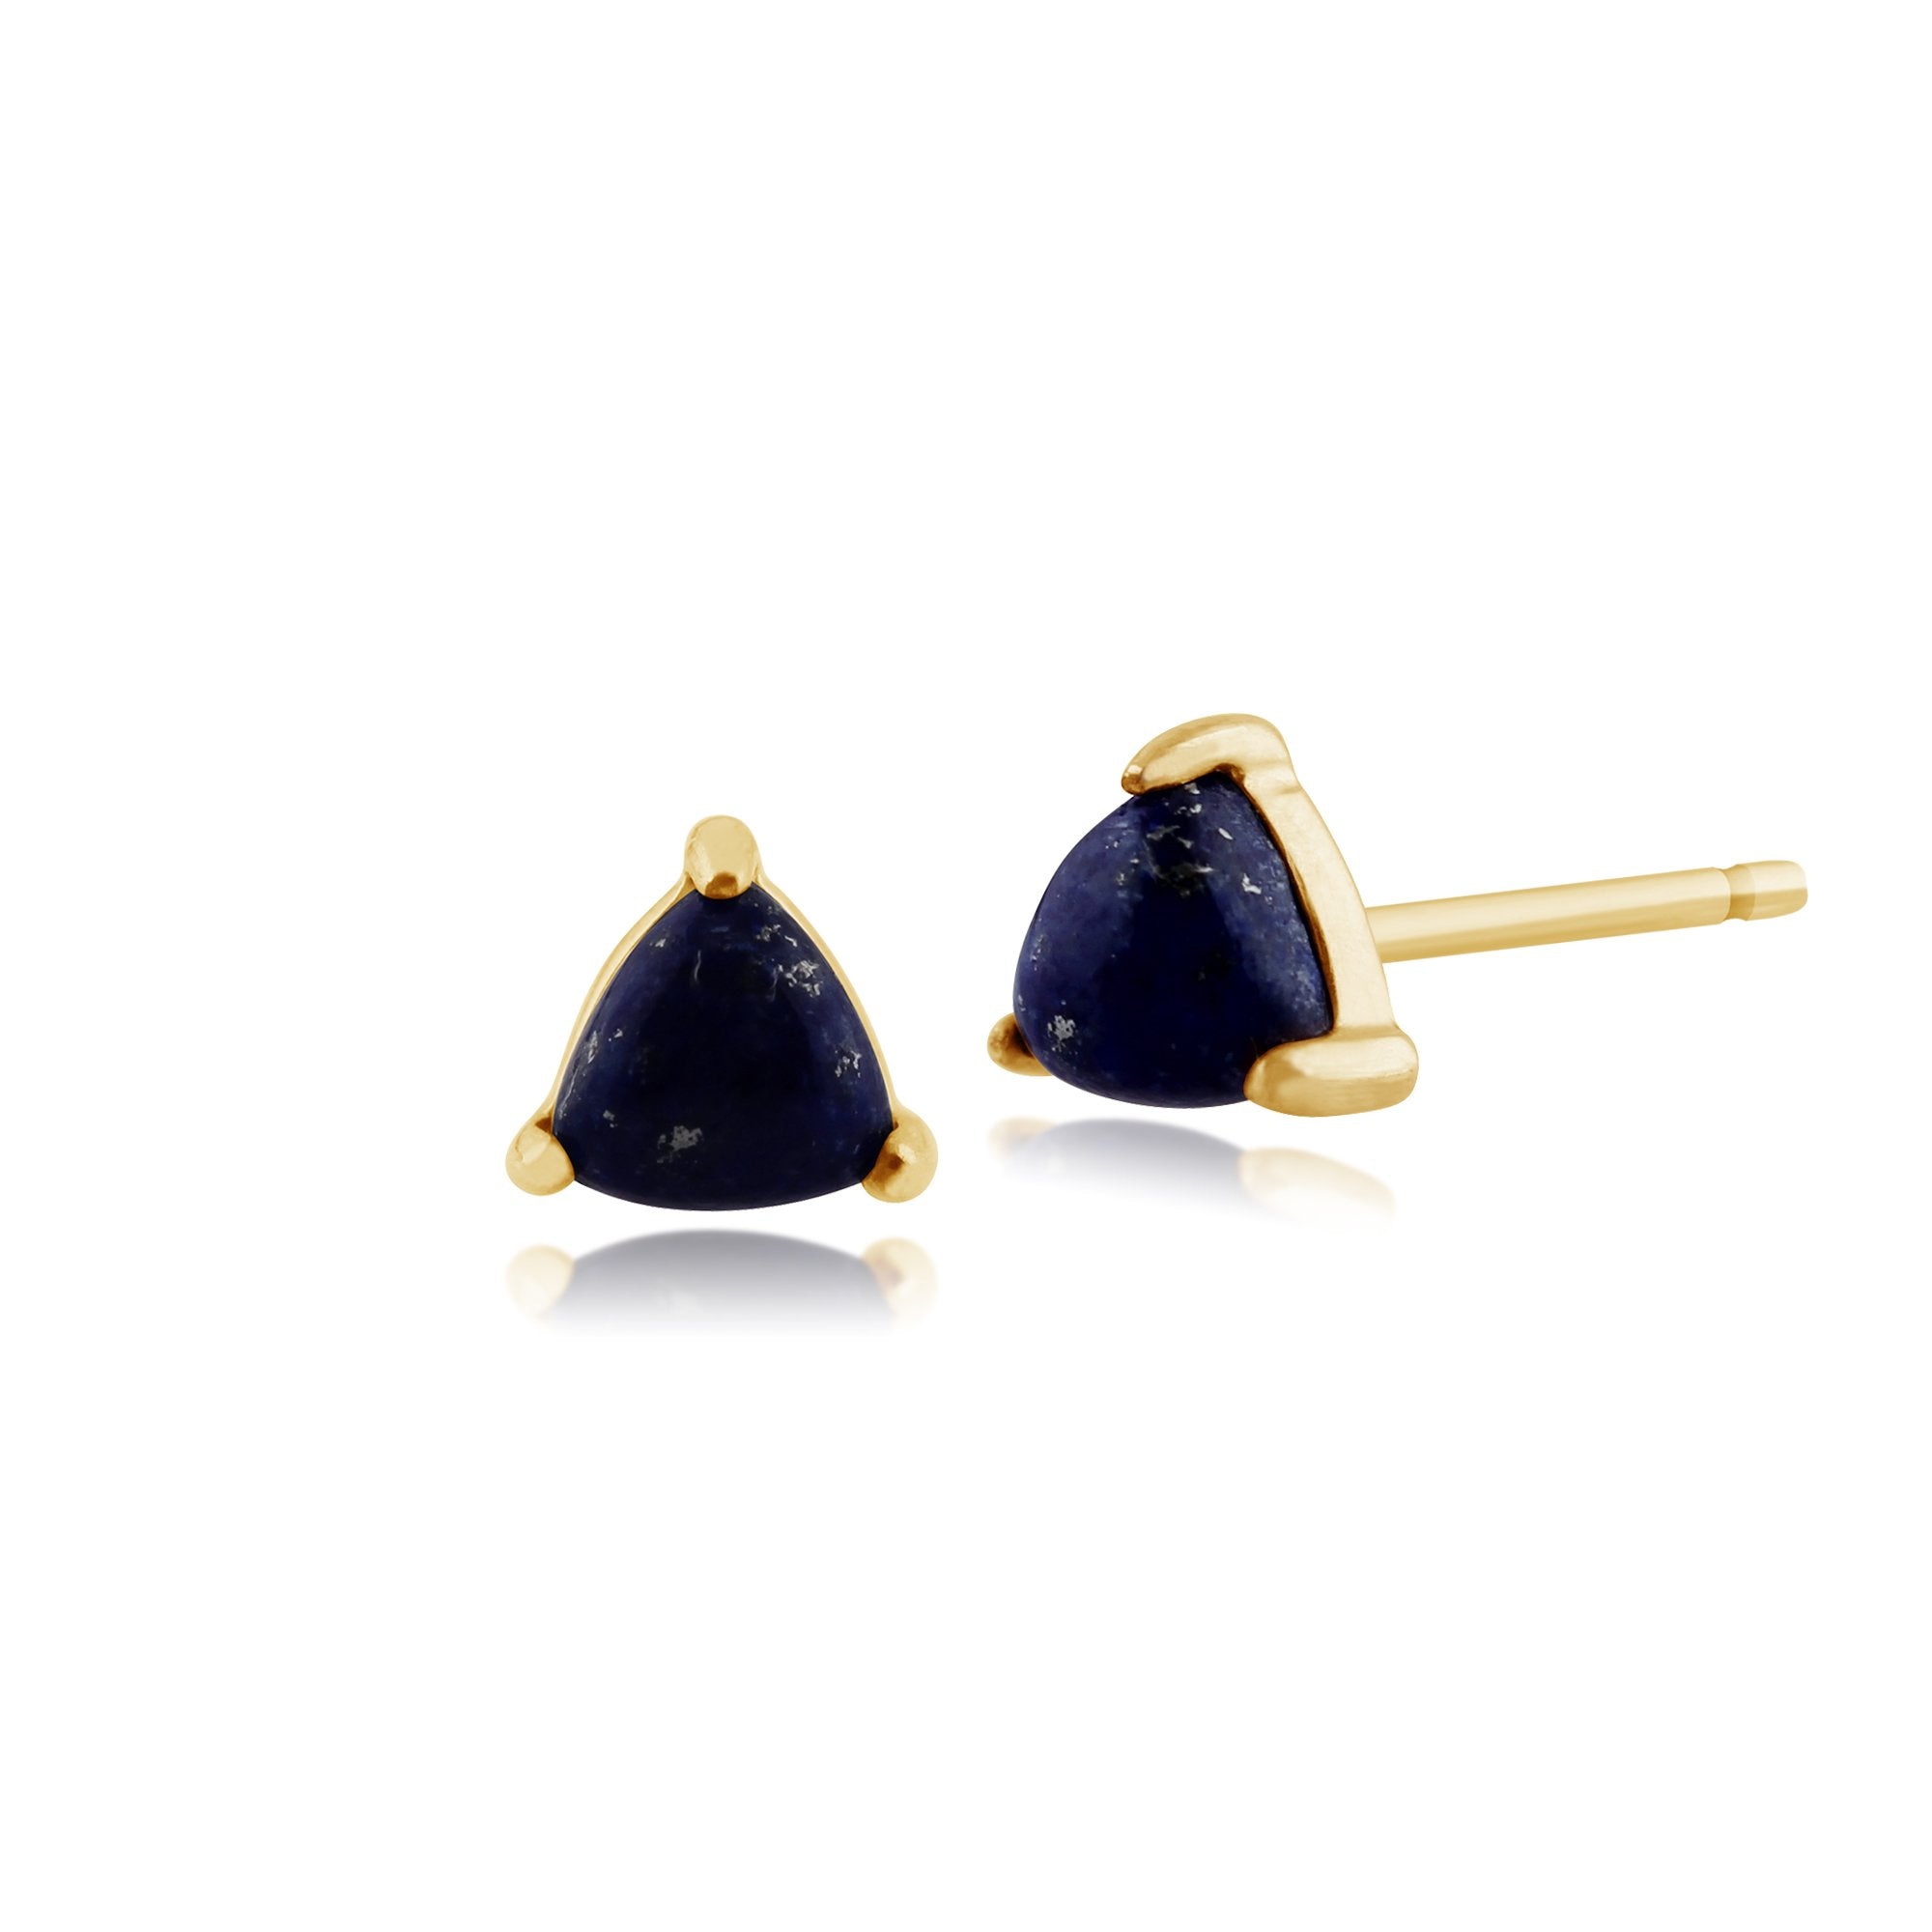 Classic Trillion Lapis Lazuli Stud Earrings in 9ct Yellow Gold 3.5mm